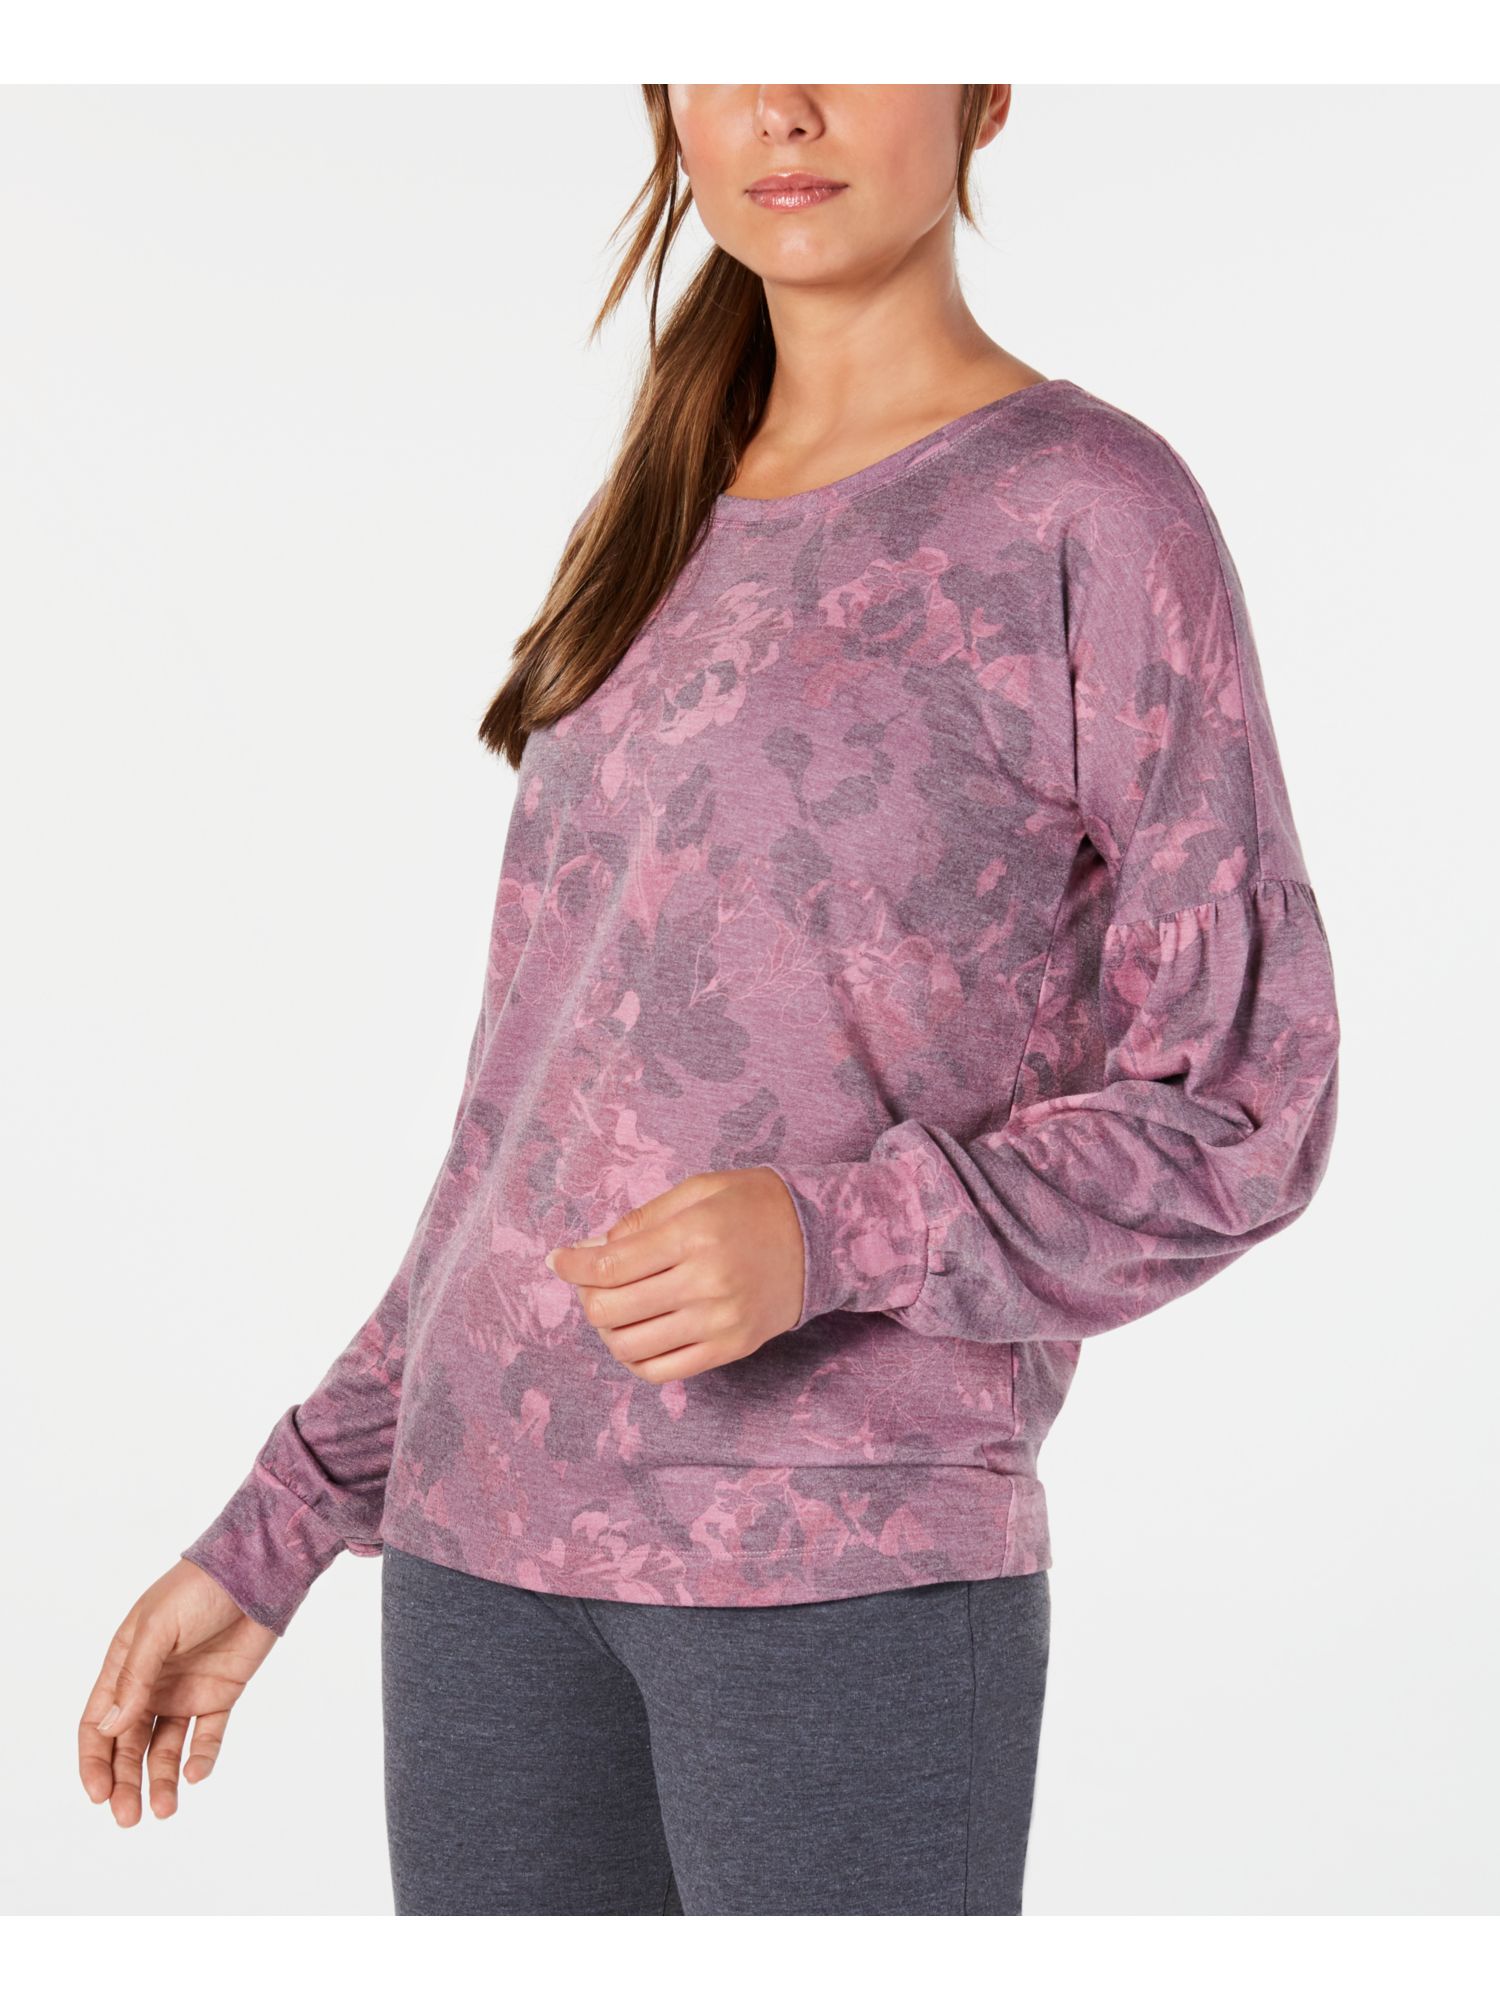 IDEOLOGY Womens Pink Floral Long Sleeve Jewel Neck Top XS - image 1 of 4